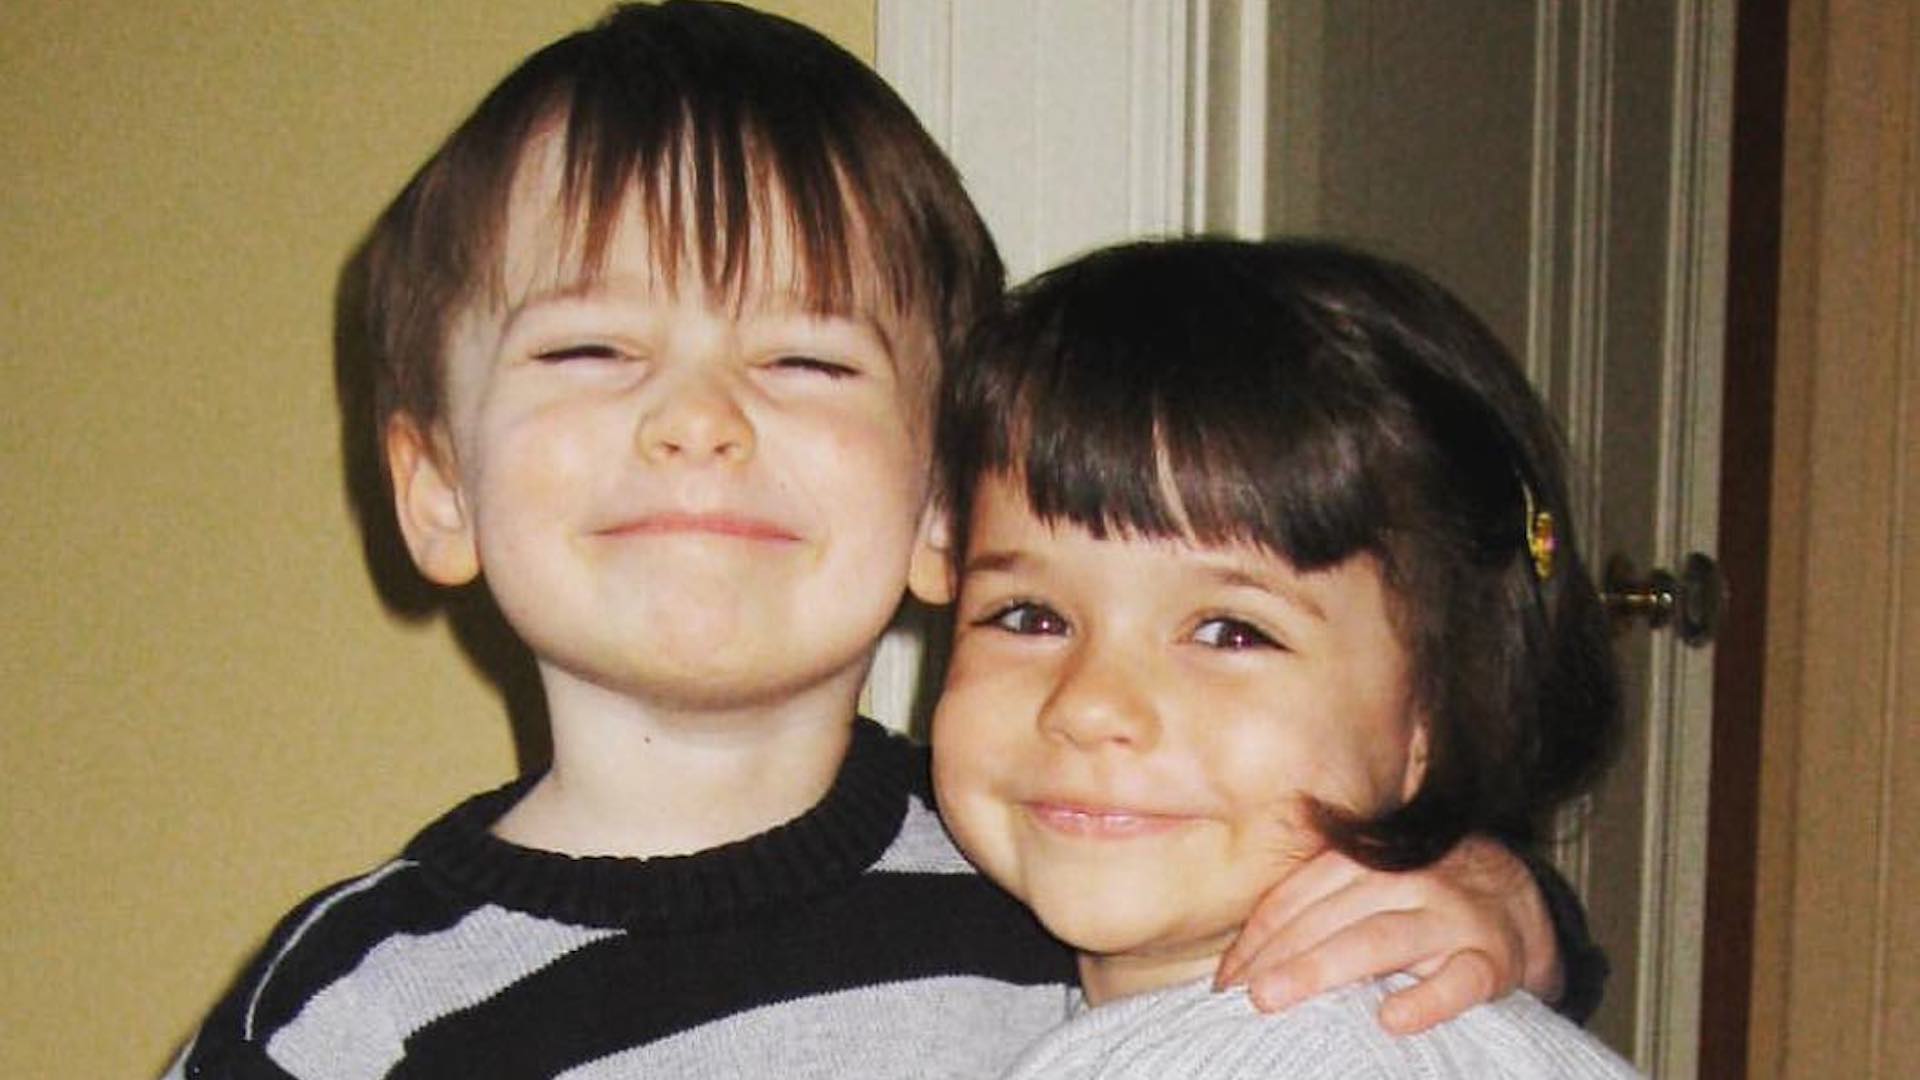 Noah Schnapp with his twin sister